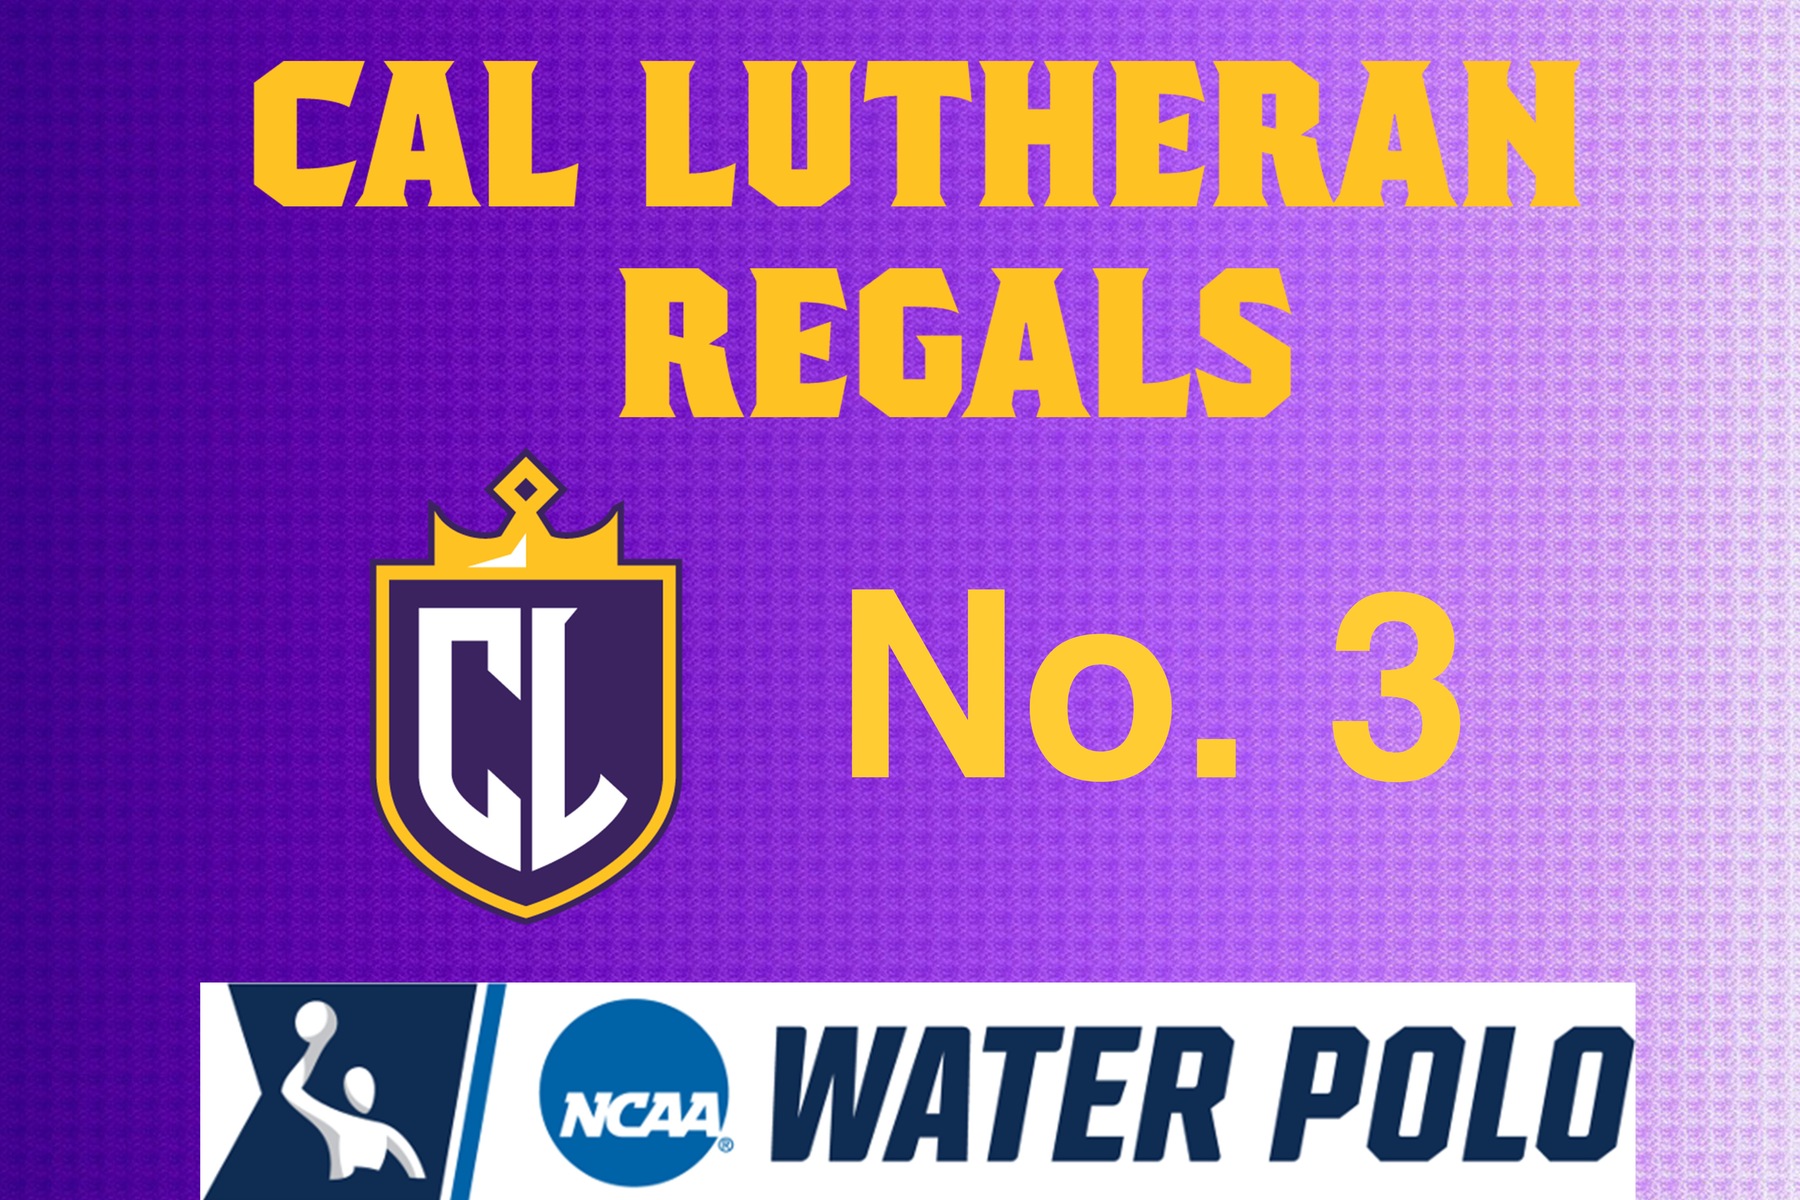 Women’s Water Polo Ranked No. 3 According to NCAA